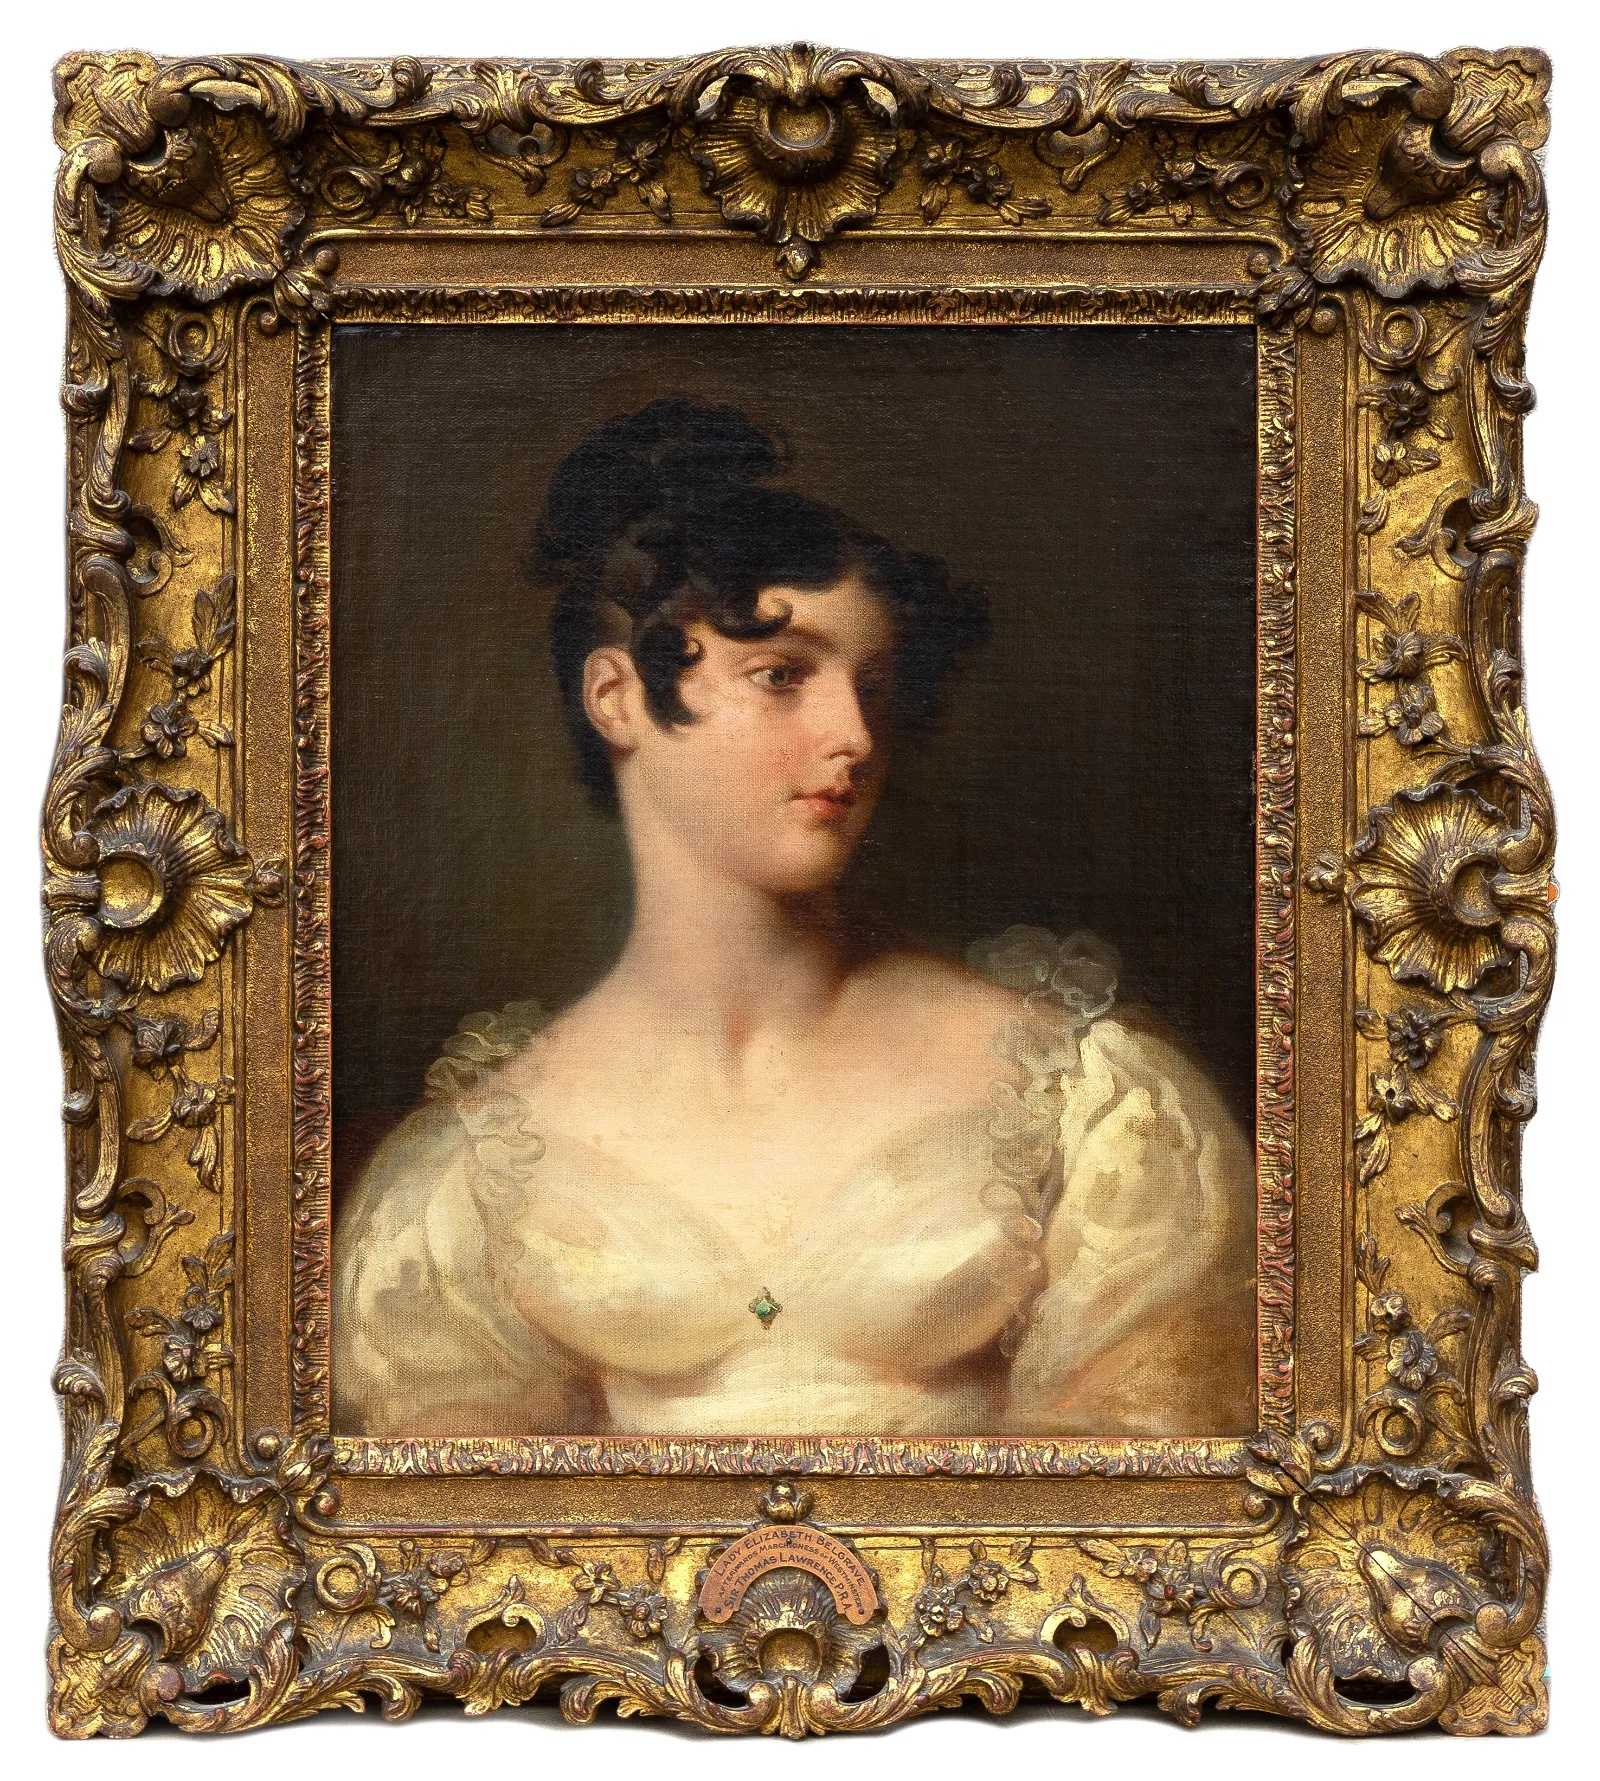 Portrait of Lady Elizabeth Mary, Countess of Belgrave by Sir Thomas Lawrence, $16,000 ($20,000 with buyer's premium) at Cottone Auctions.